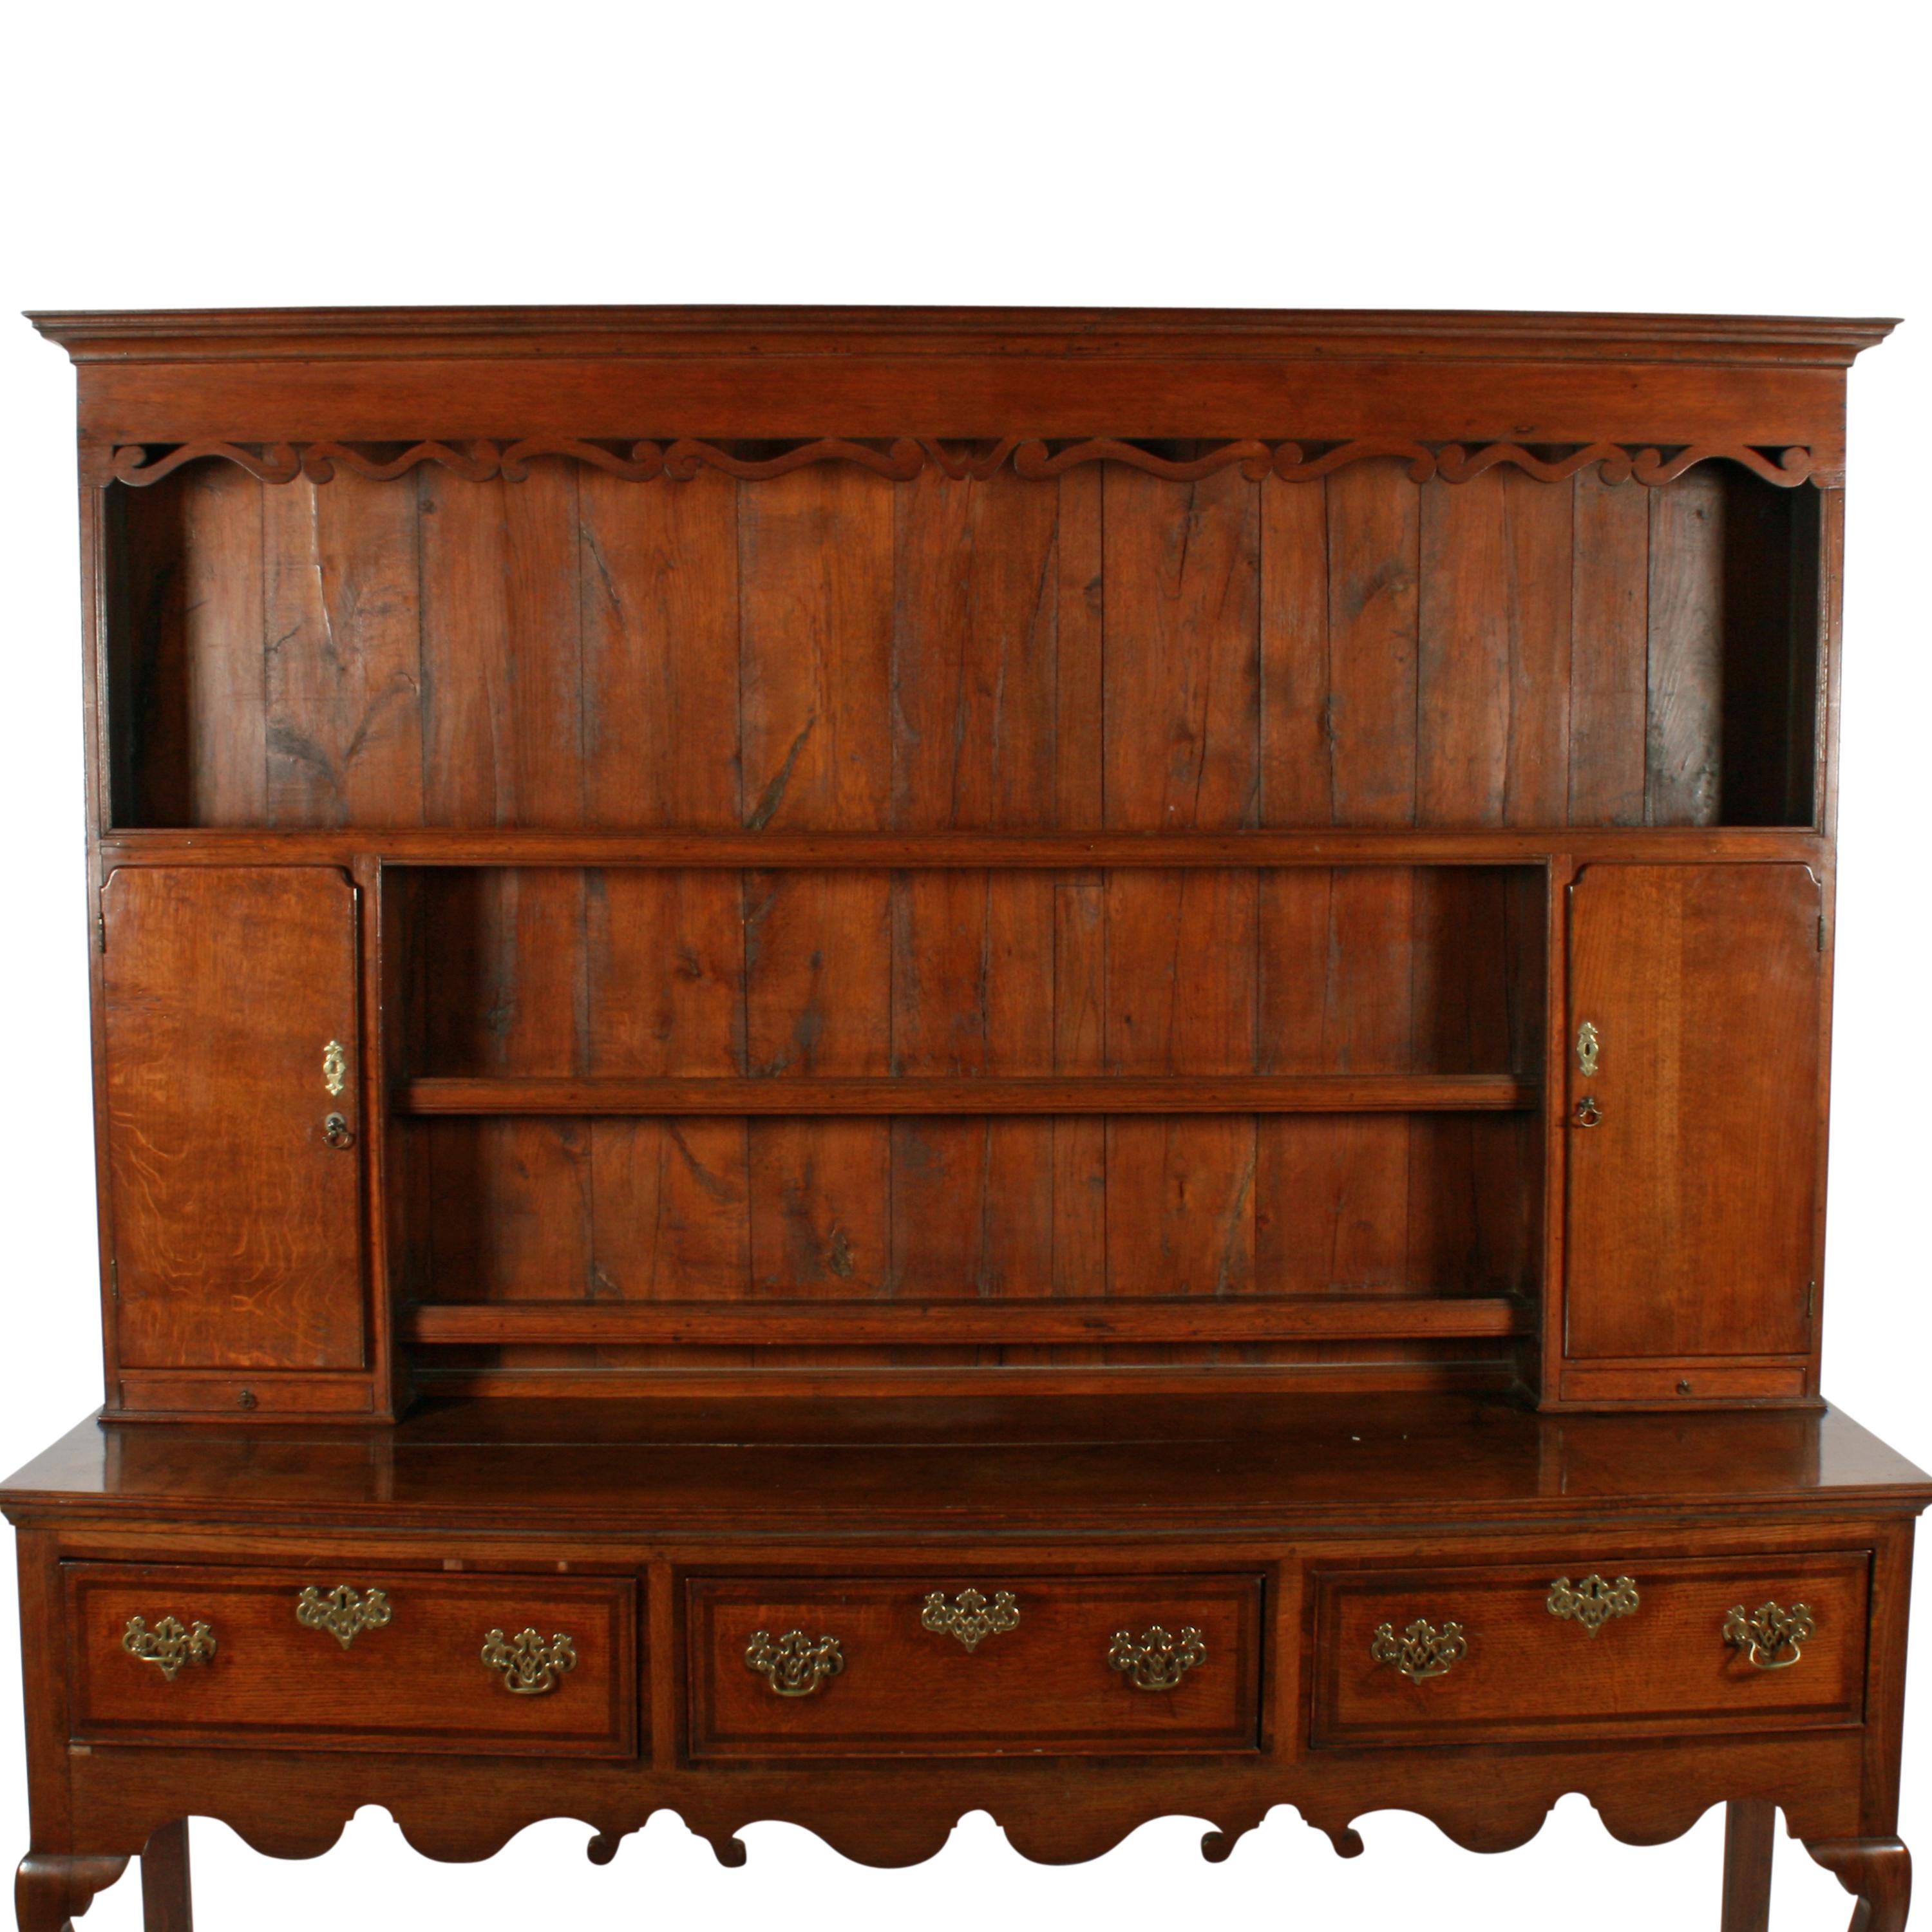 18th century style oak dresser

A George II style oak three-drawer dresser and delft rack.

The dresser base has cabriole shaped front legs with a 'Knight's Foot' shaped toe and square back legs.

The three drawers are crossbanded with